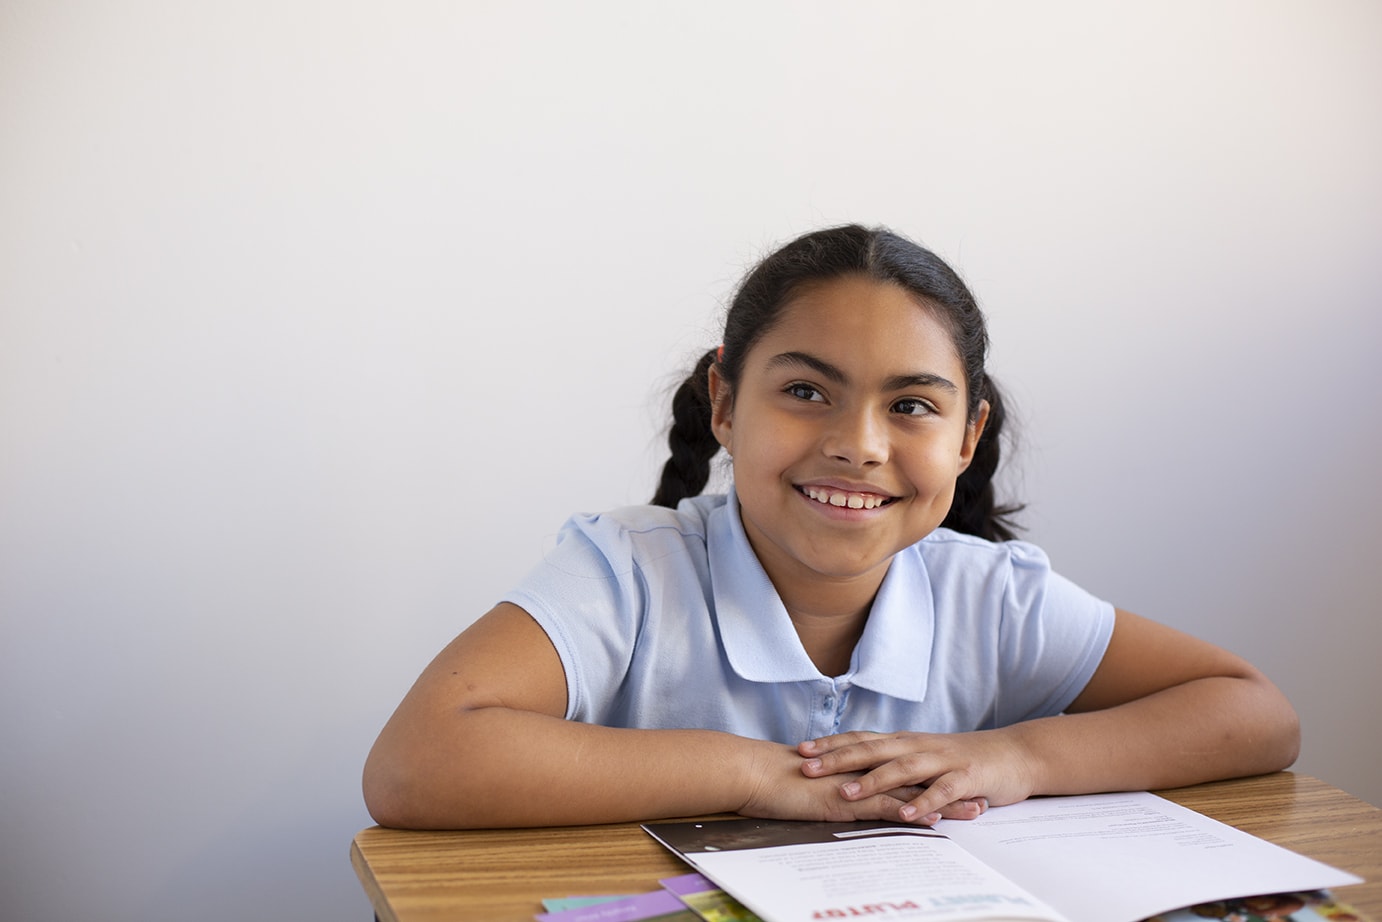 Young girl smiling at camera while sitting at a desk with books, wearing a light blue polo shirt.